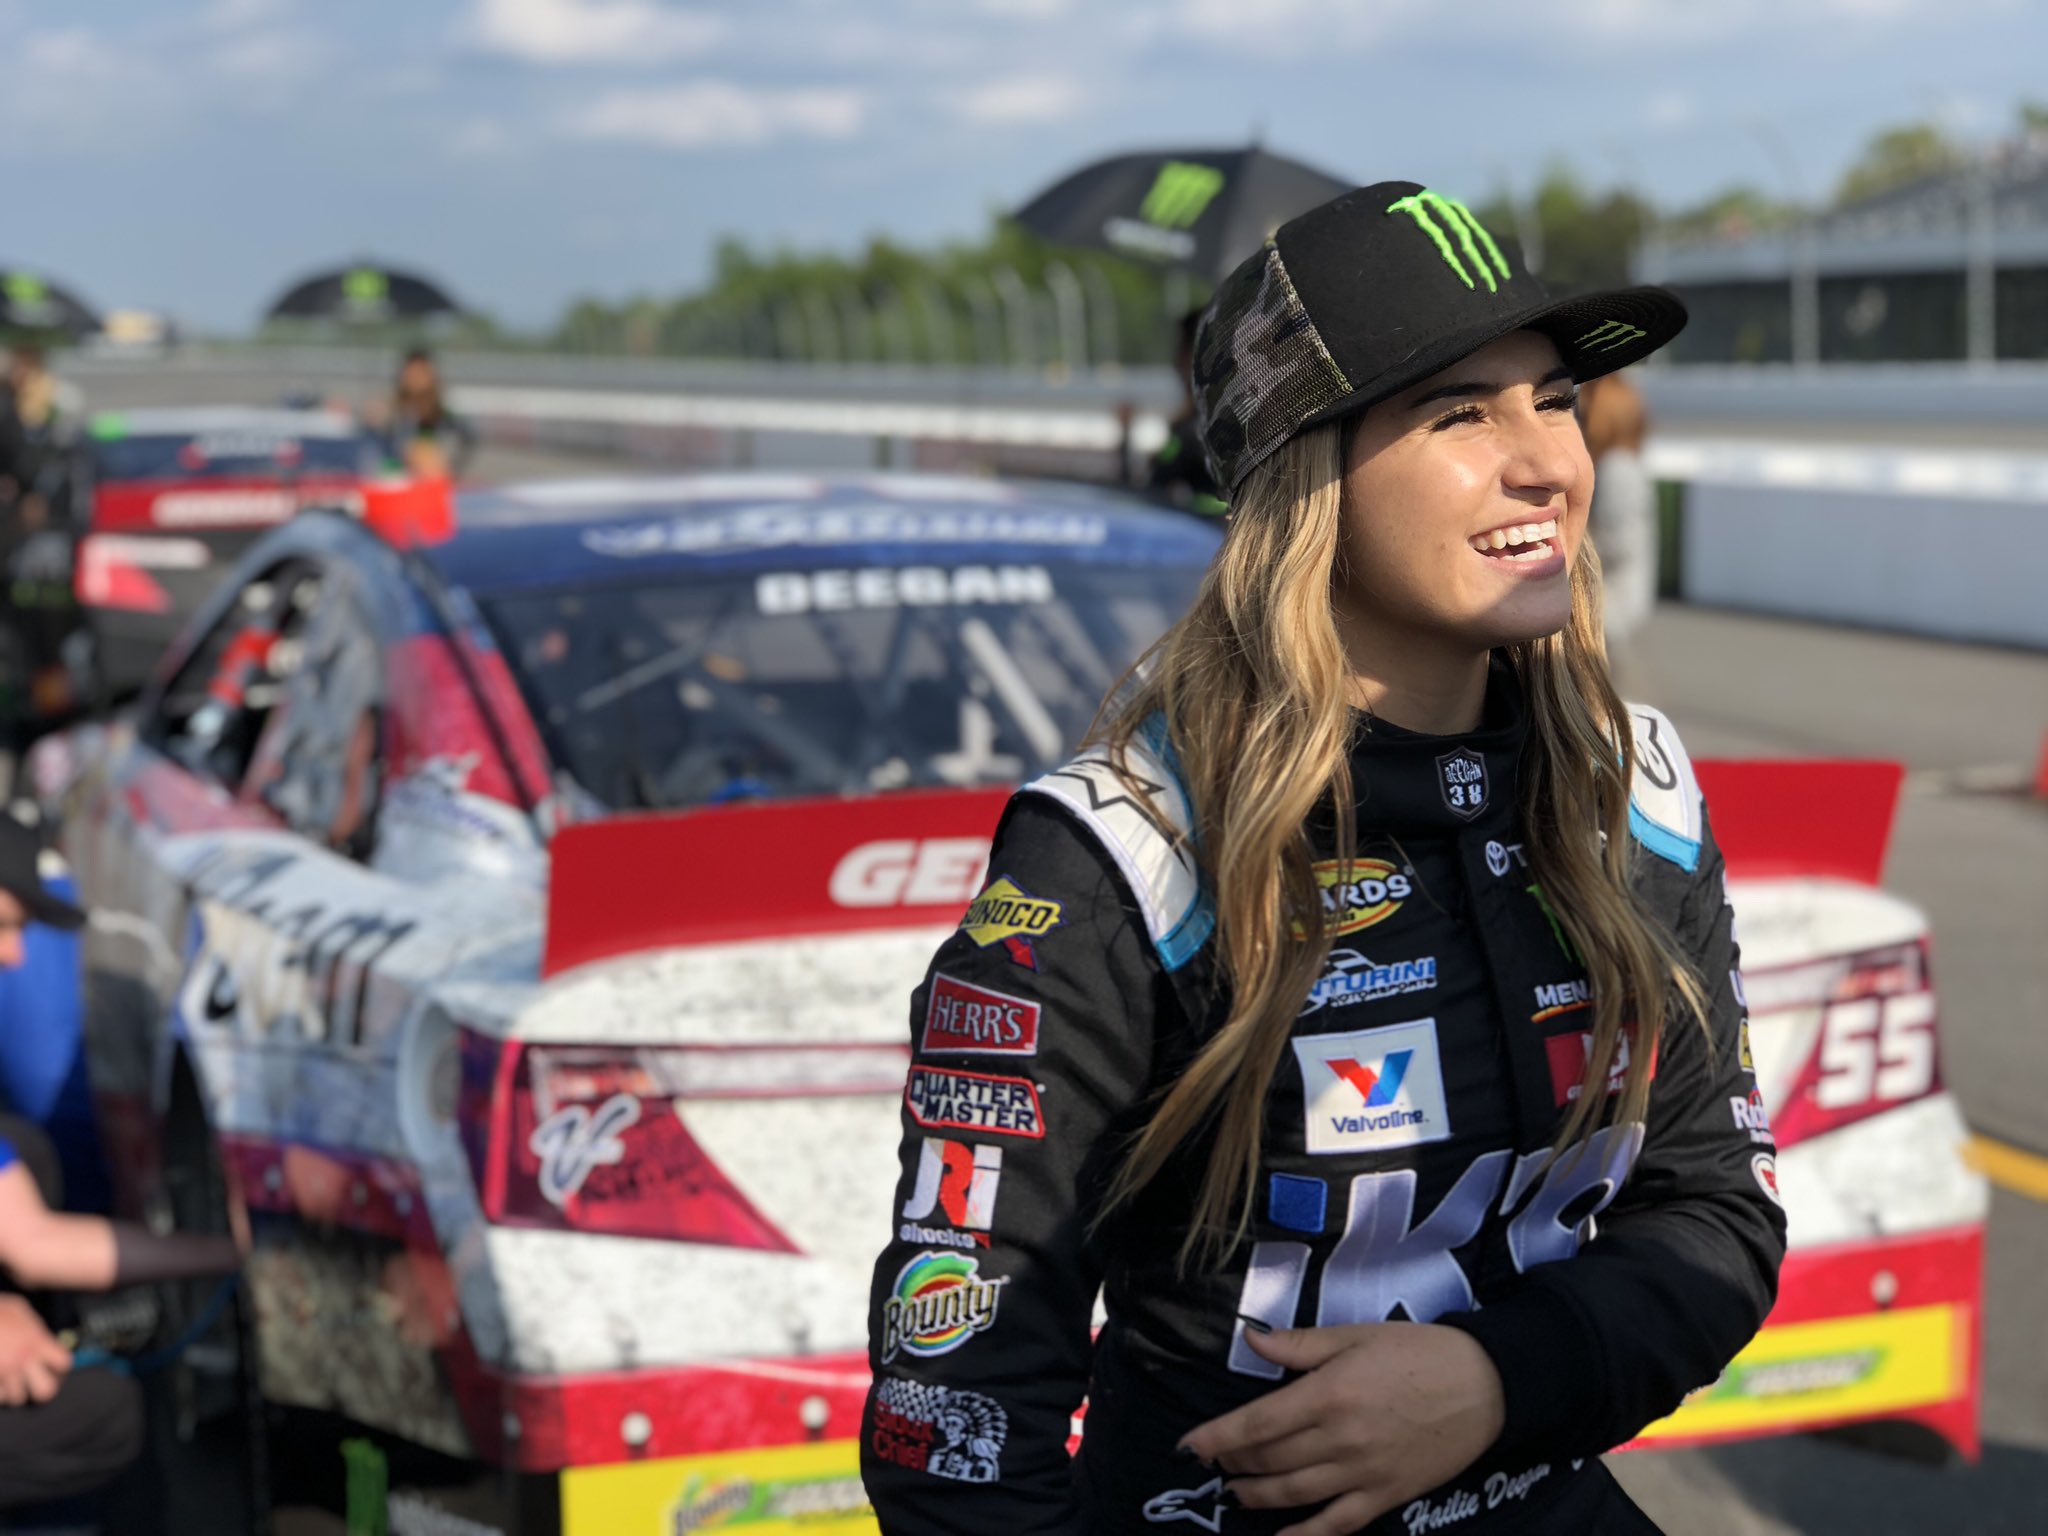 Hailie Deegan on Twitter: "Ended up p7 tonight! Had a lil pi